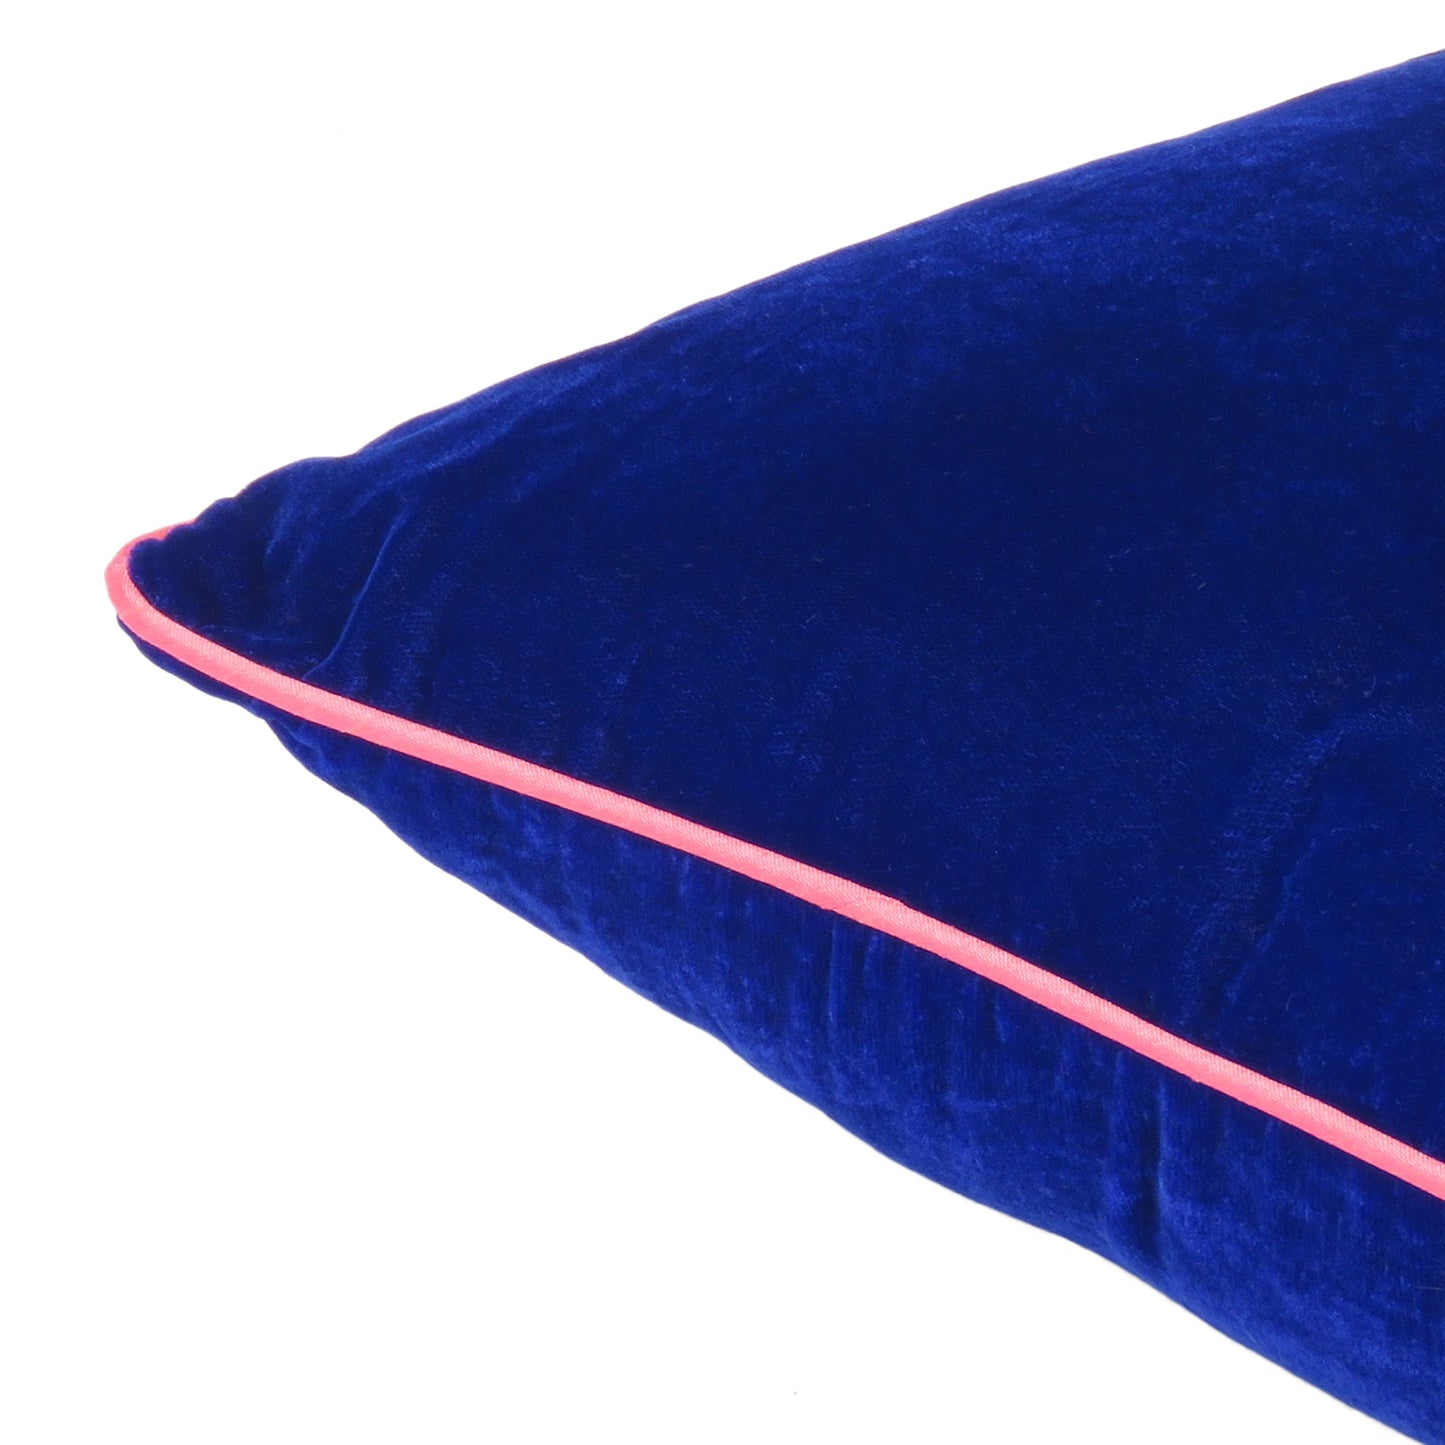 Royal Blue Velvet Cushion Cover with Pink Piping Edge in Set of 2